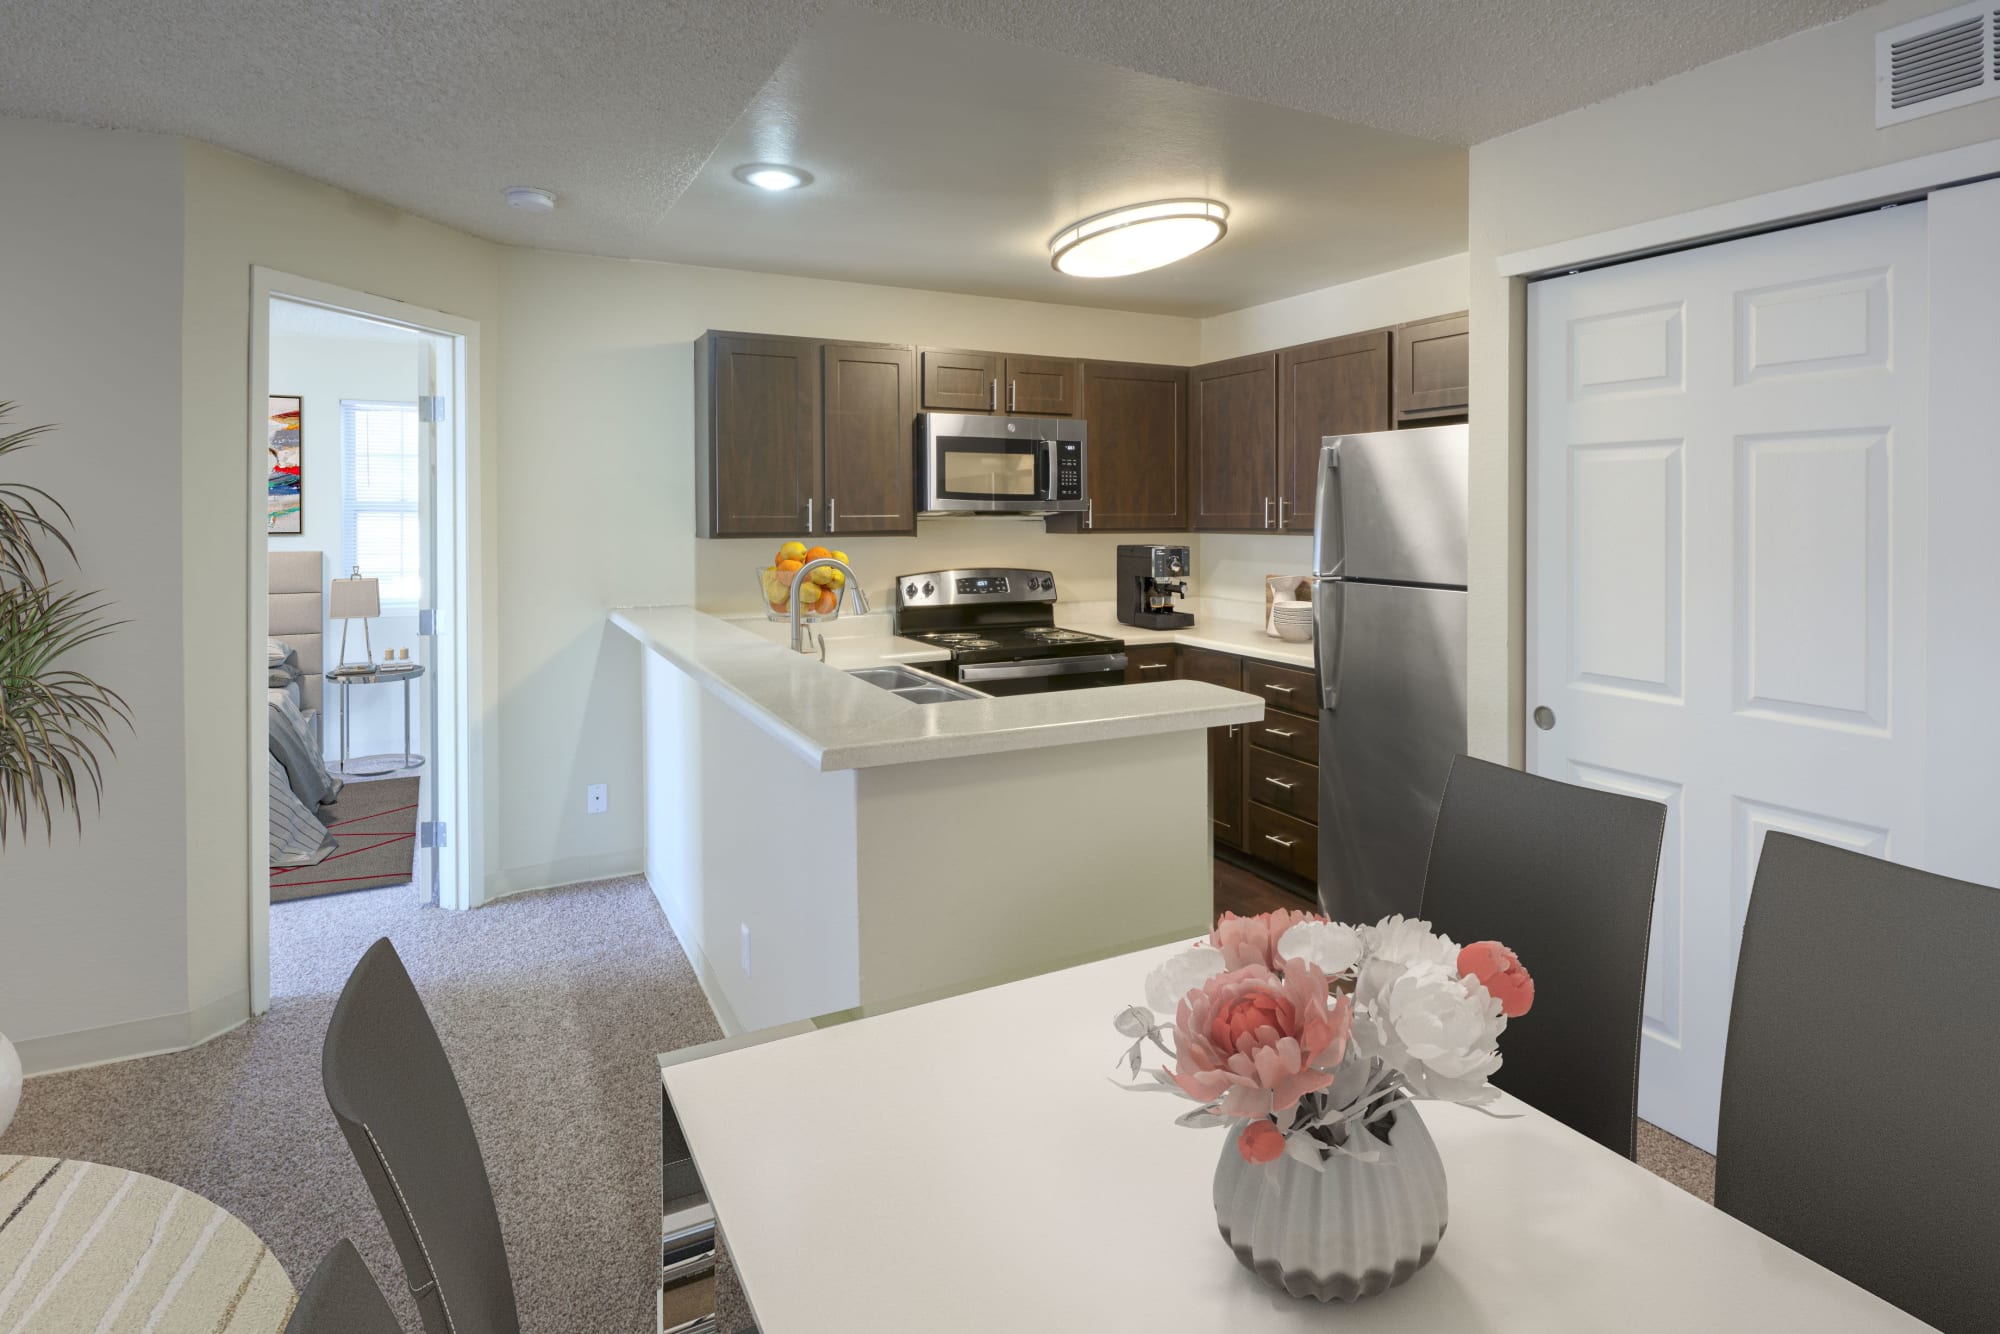 Kitchen overlooking the living room in an open floor plan at Bluesky Landing Apartments in Lakewood, Colorado